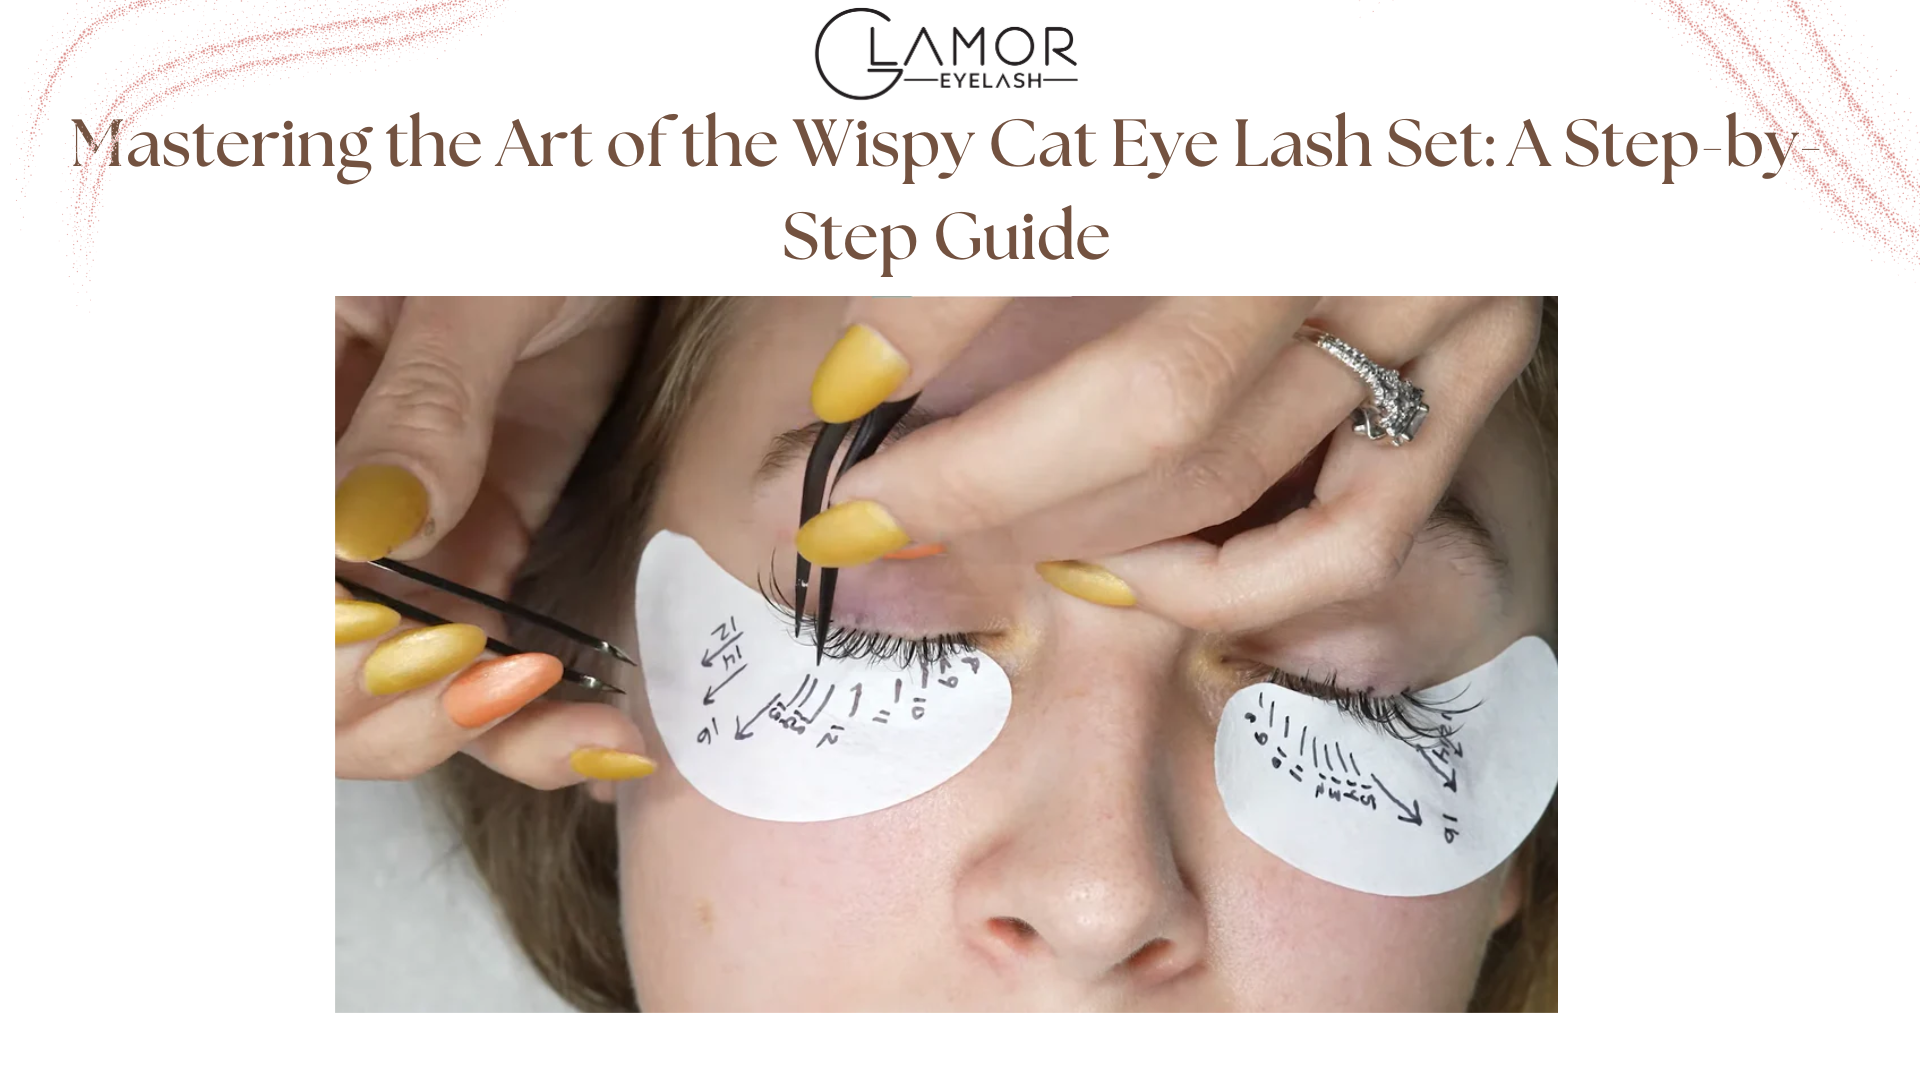 Mastering the Art of the Wispy Cat Eye Lash Set: A Step-by-Step Guide